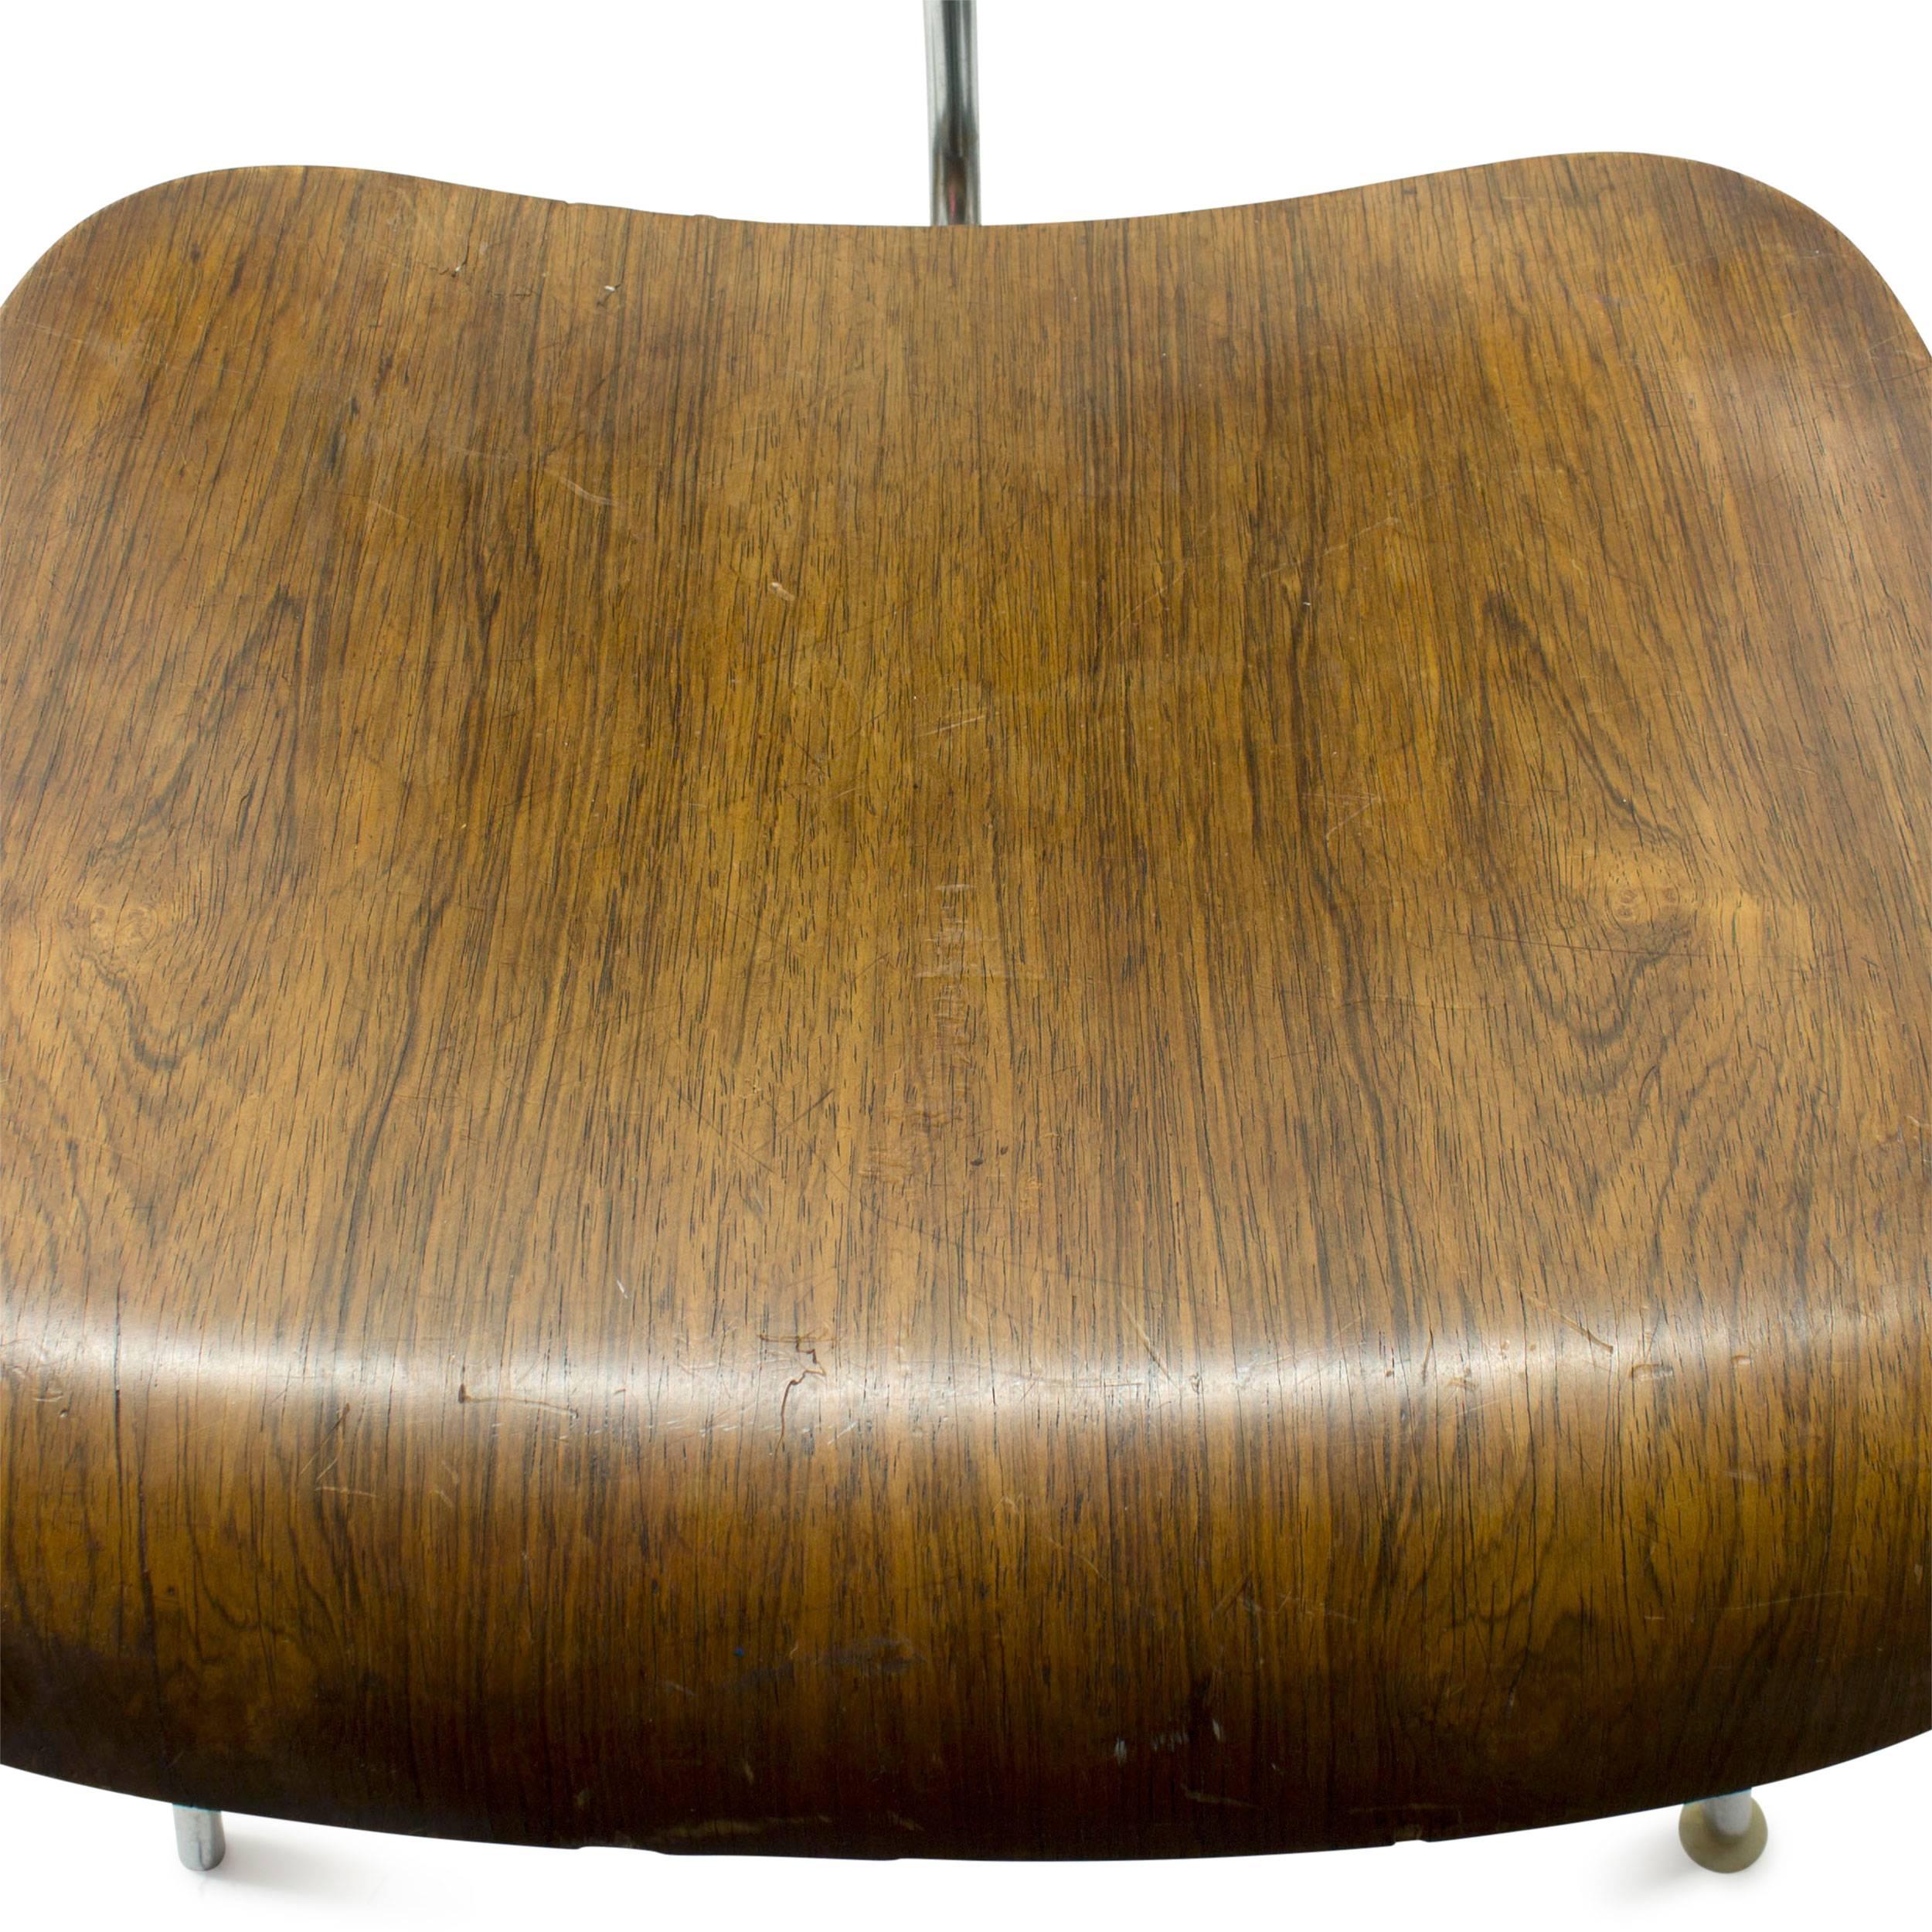 Mid-20th Century Authentic Vintage Rosewood Herman Miller DCW Chair by Charles & Ray Eames For Sale